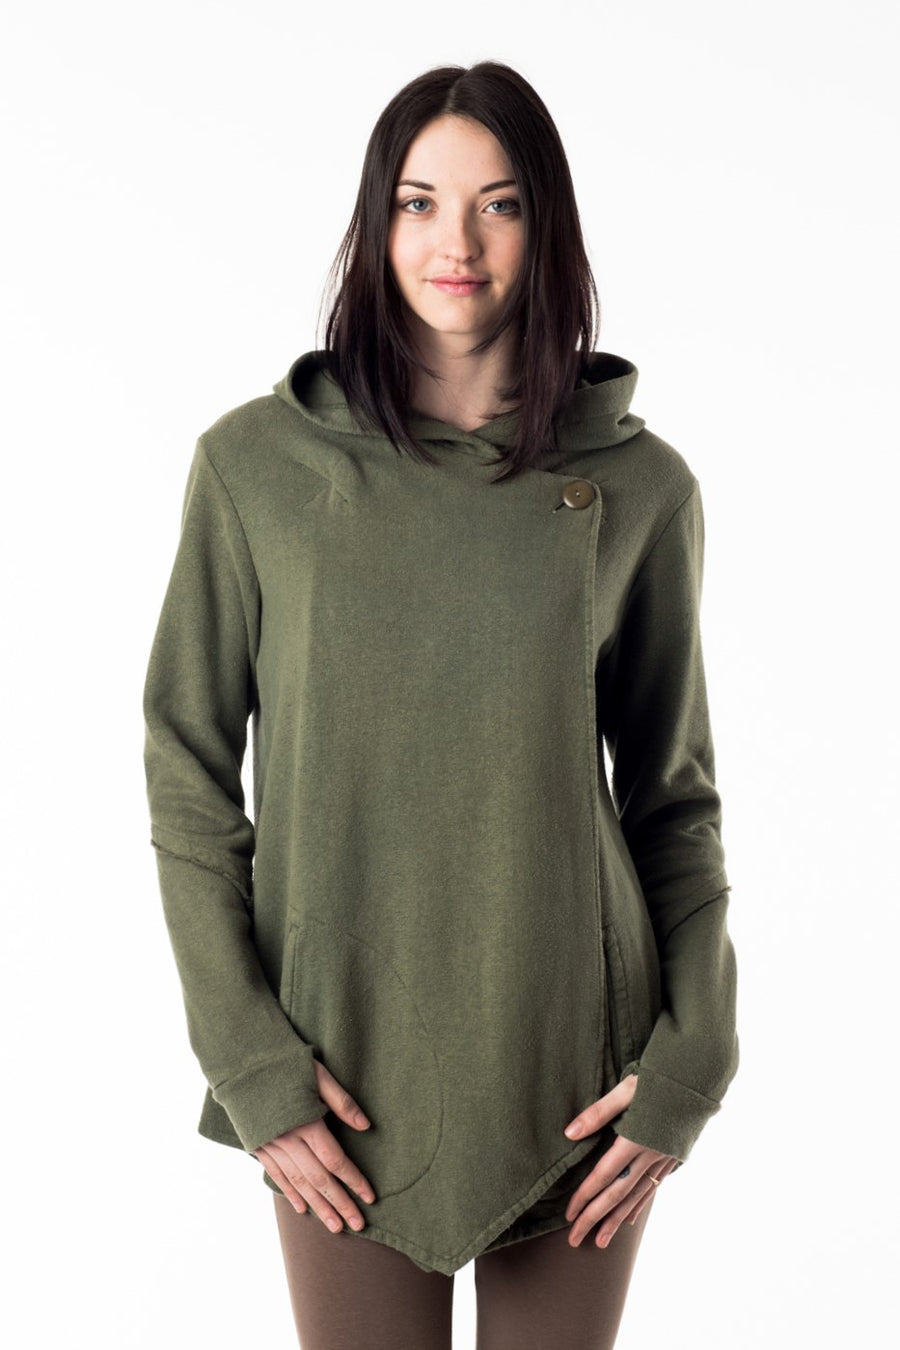 Slow fashion for the love of Gaia. Our eco lux organic cotton hemp fleece hoodie with pockets, comes in grey and is ethically made in Vancouver BC. Embrace your inner earth goddess!